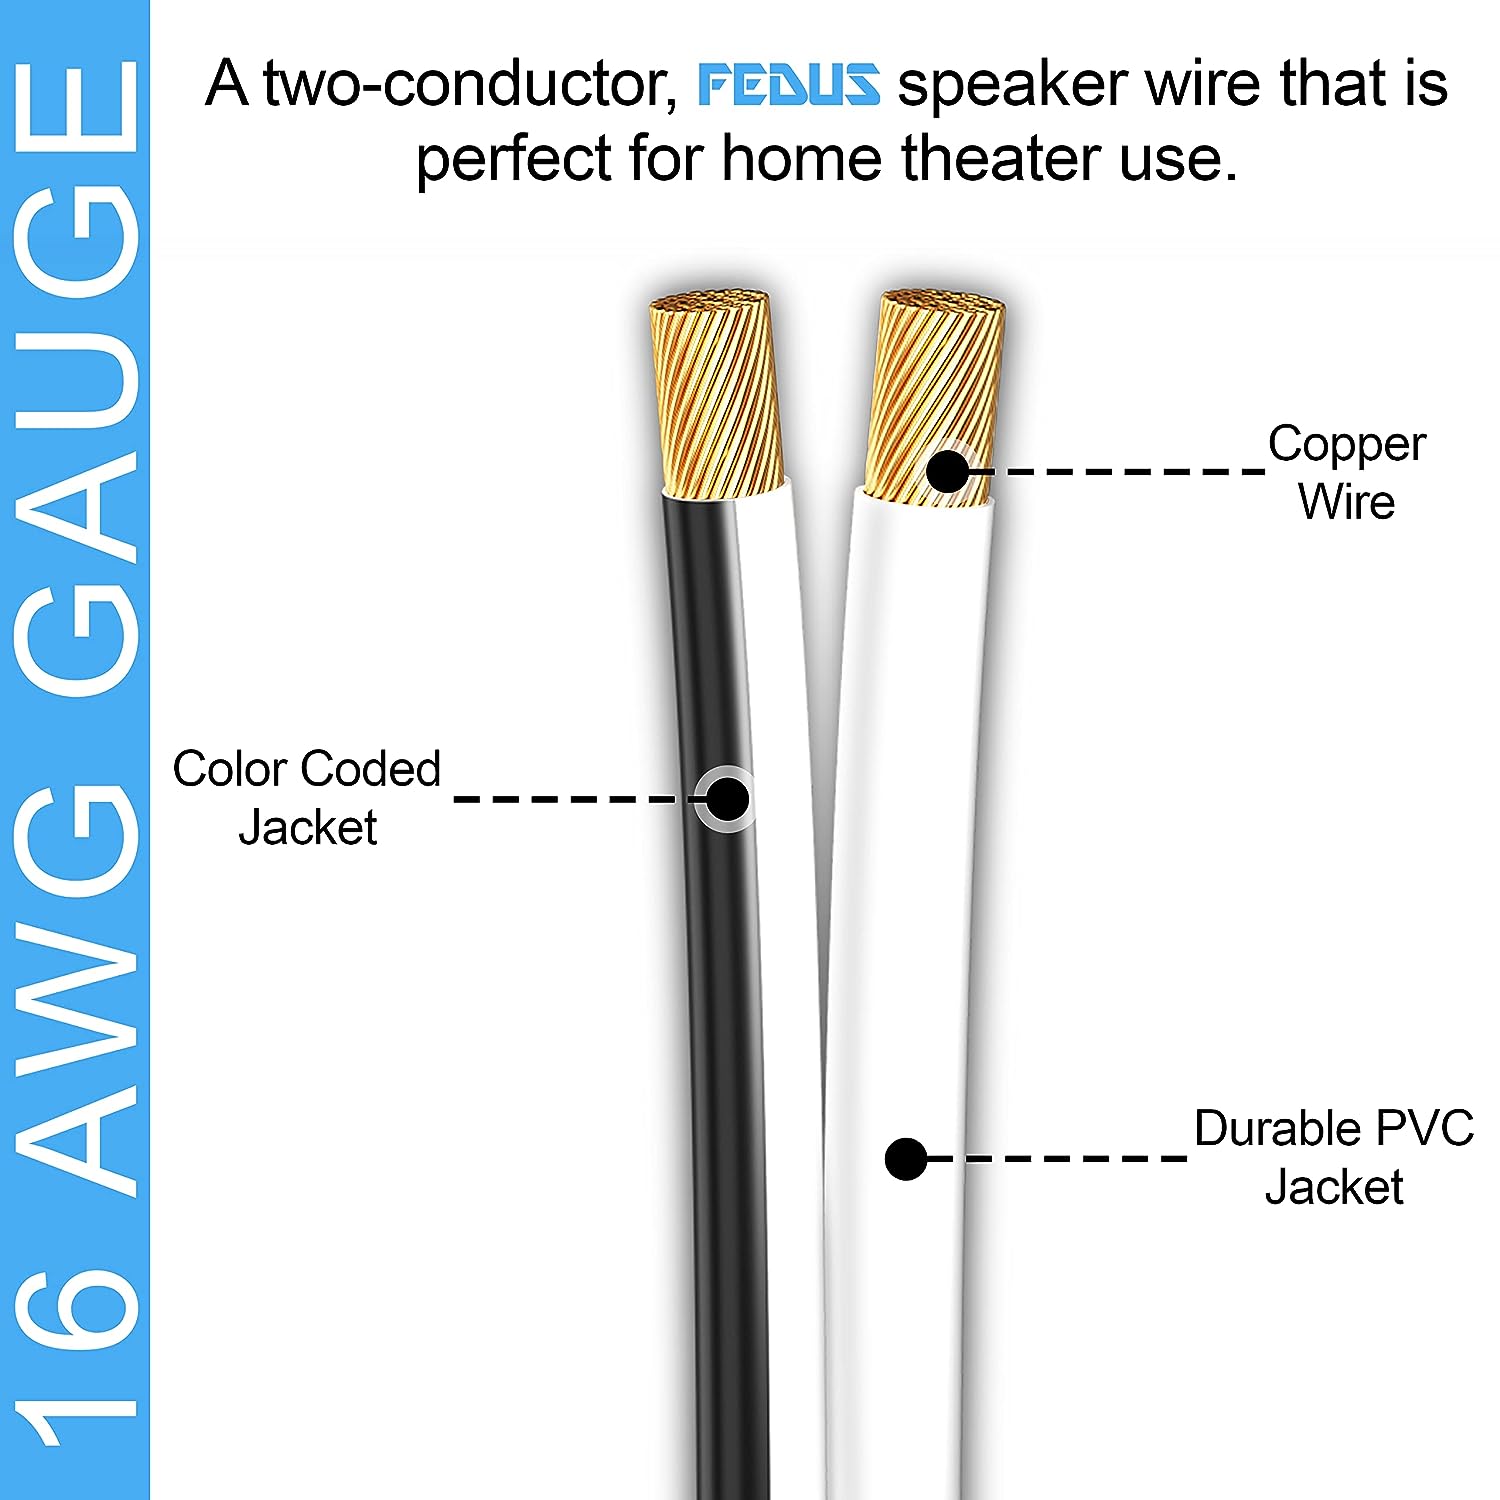 FEDUS 16 Gauge/AWG Speaker Wire Oxygen-Free Copper 2 Conductors Audio Speaker Cable For Car Speakers Stereos, Subwoofer, Home Theater Speakers, HiFi Surround Sound White/Black